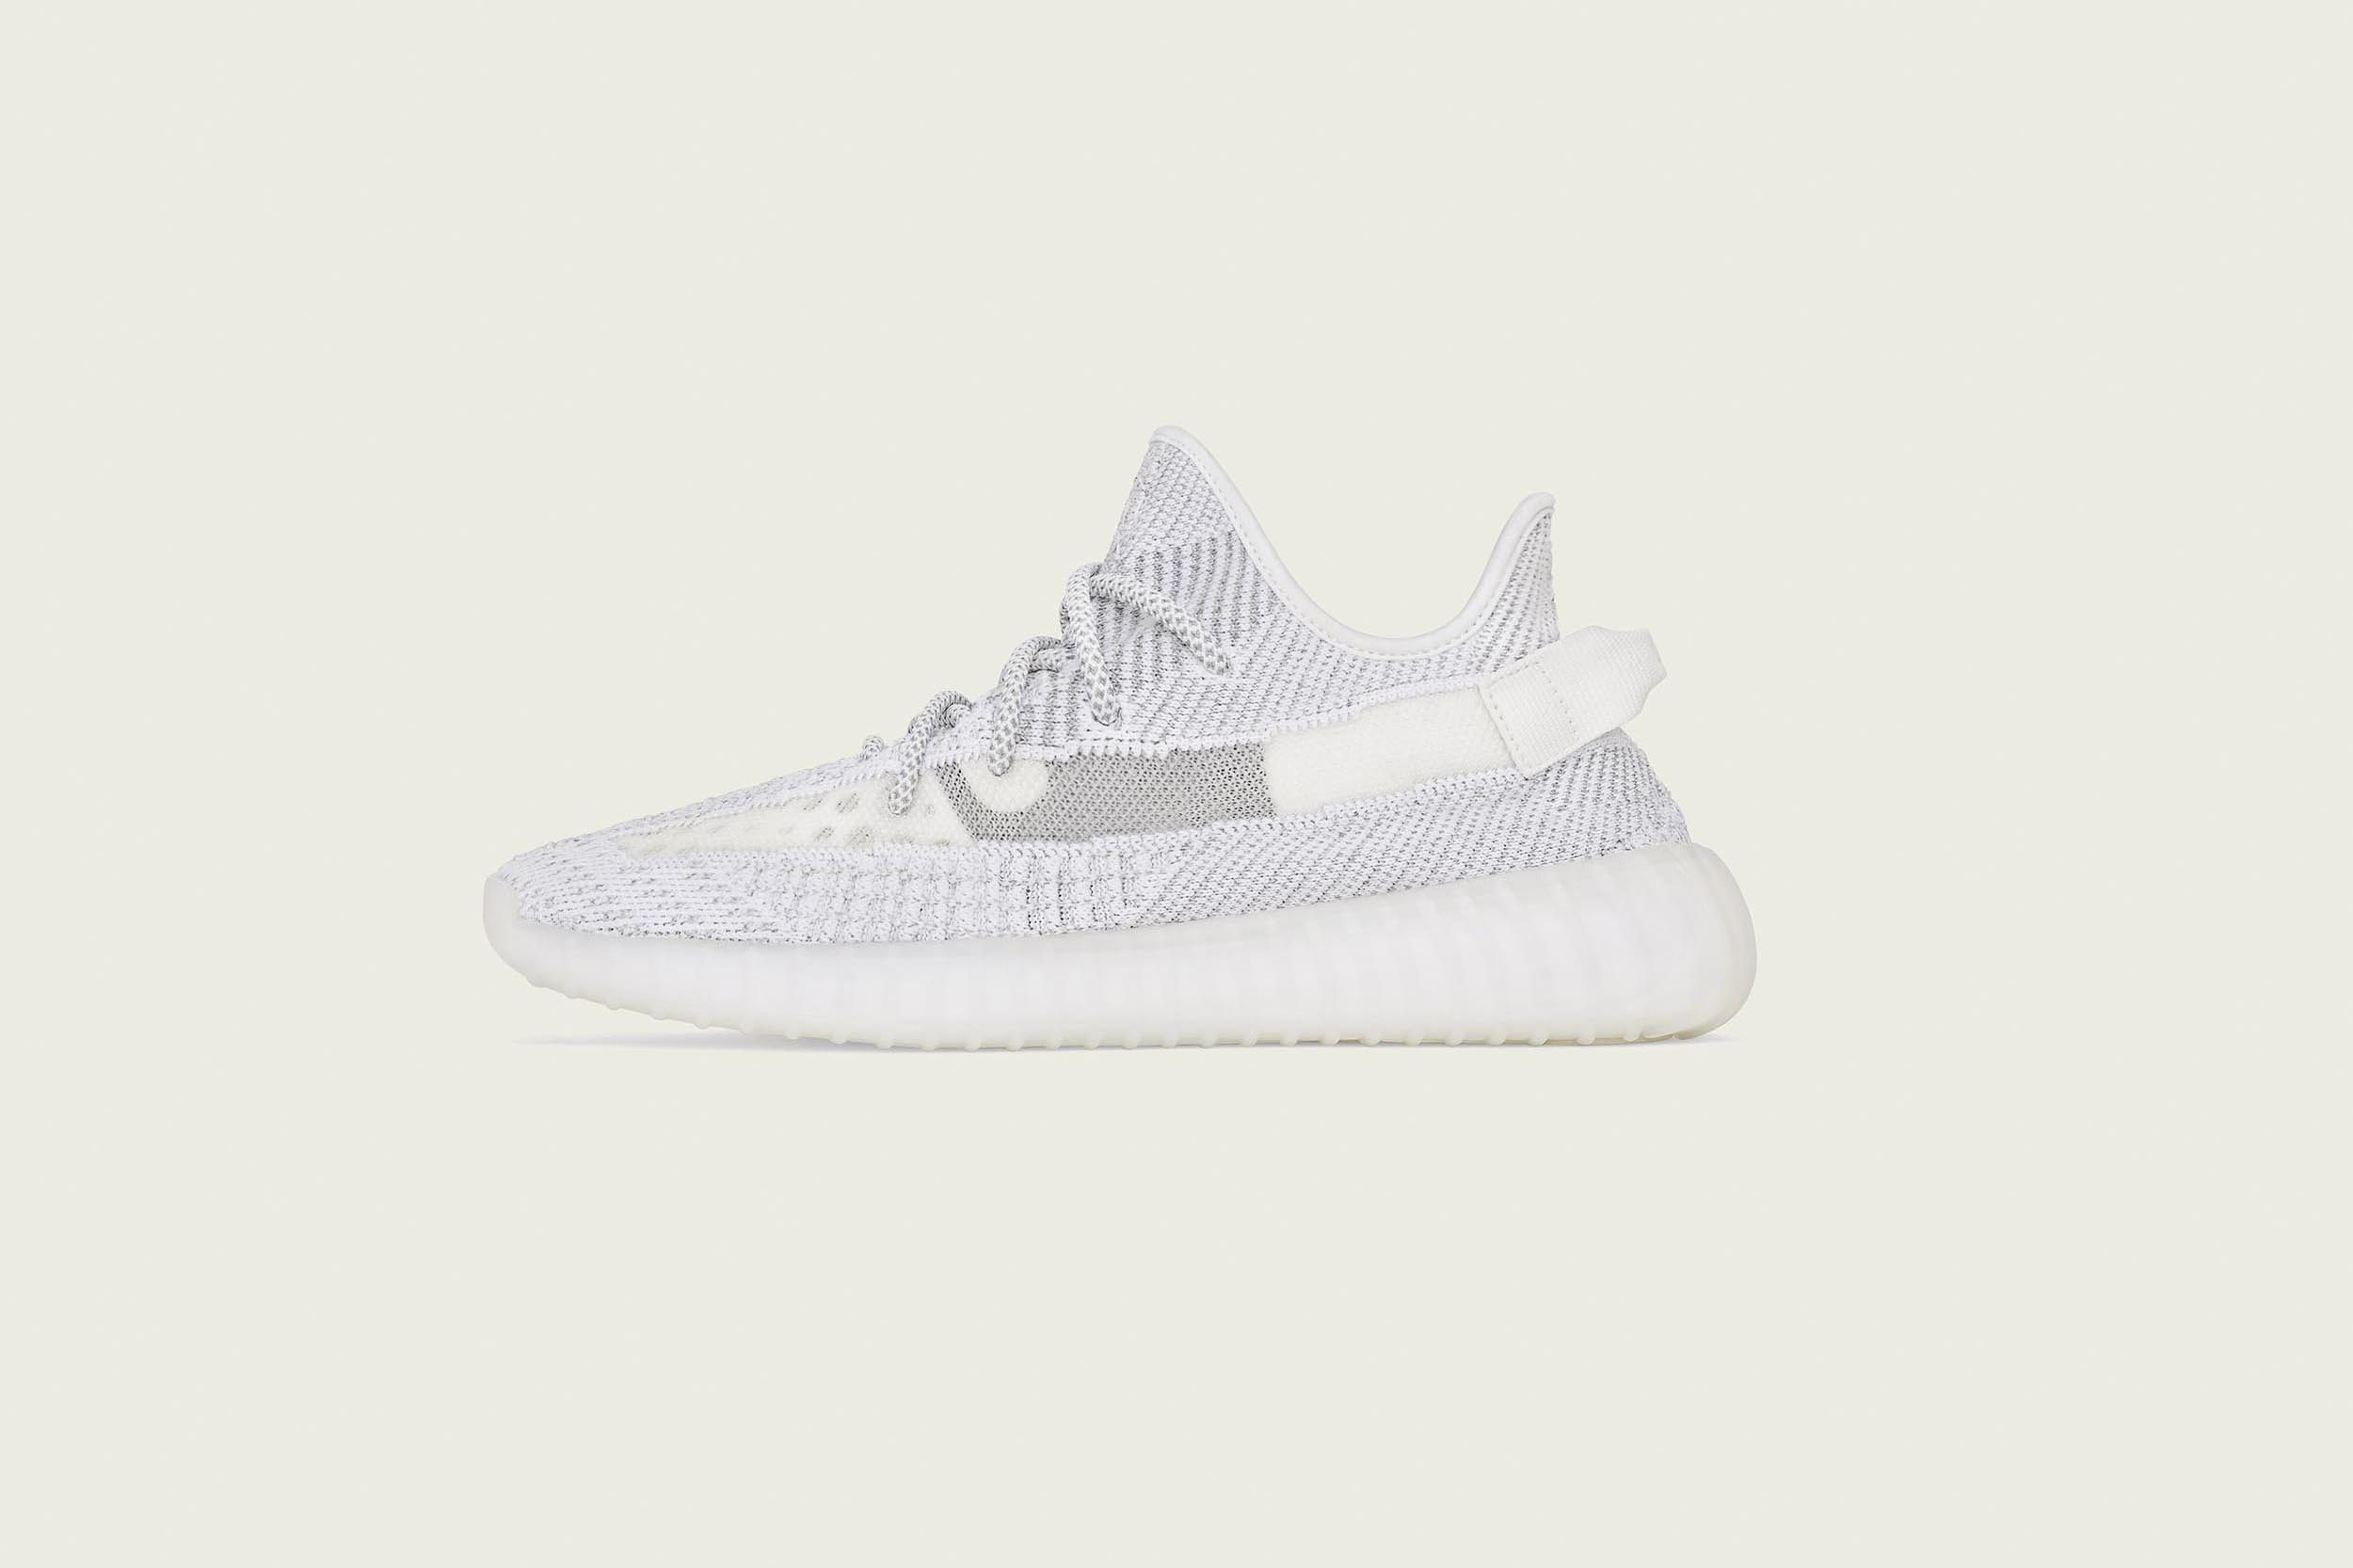 Yeezy Boost 350 V2 EF2905 - / Static / Static - - Releases